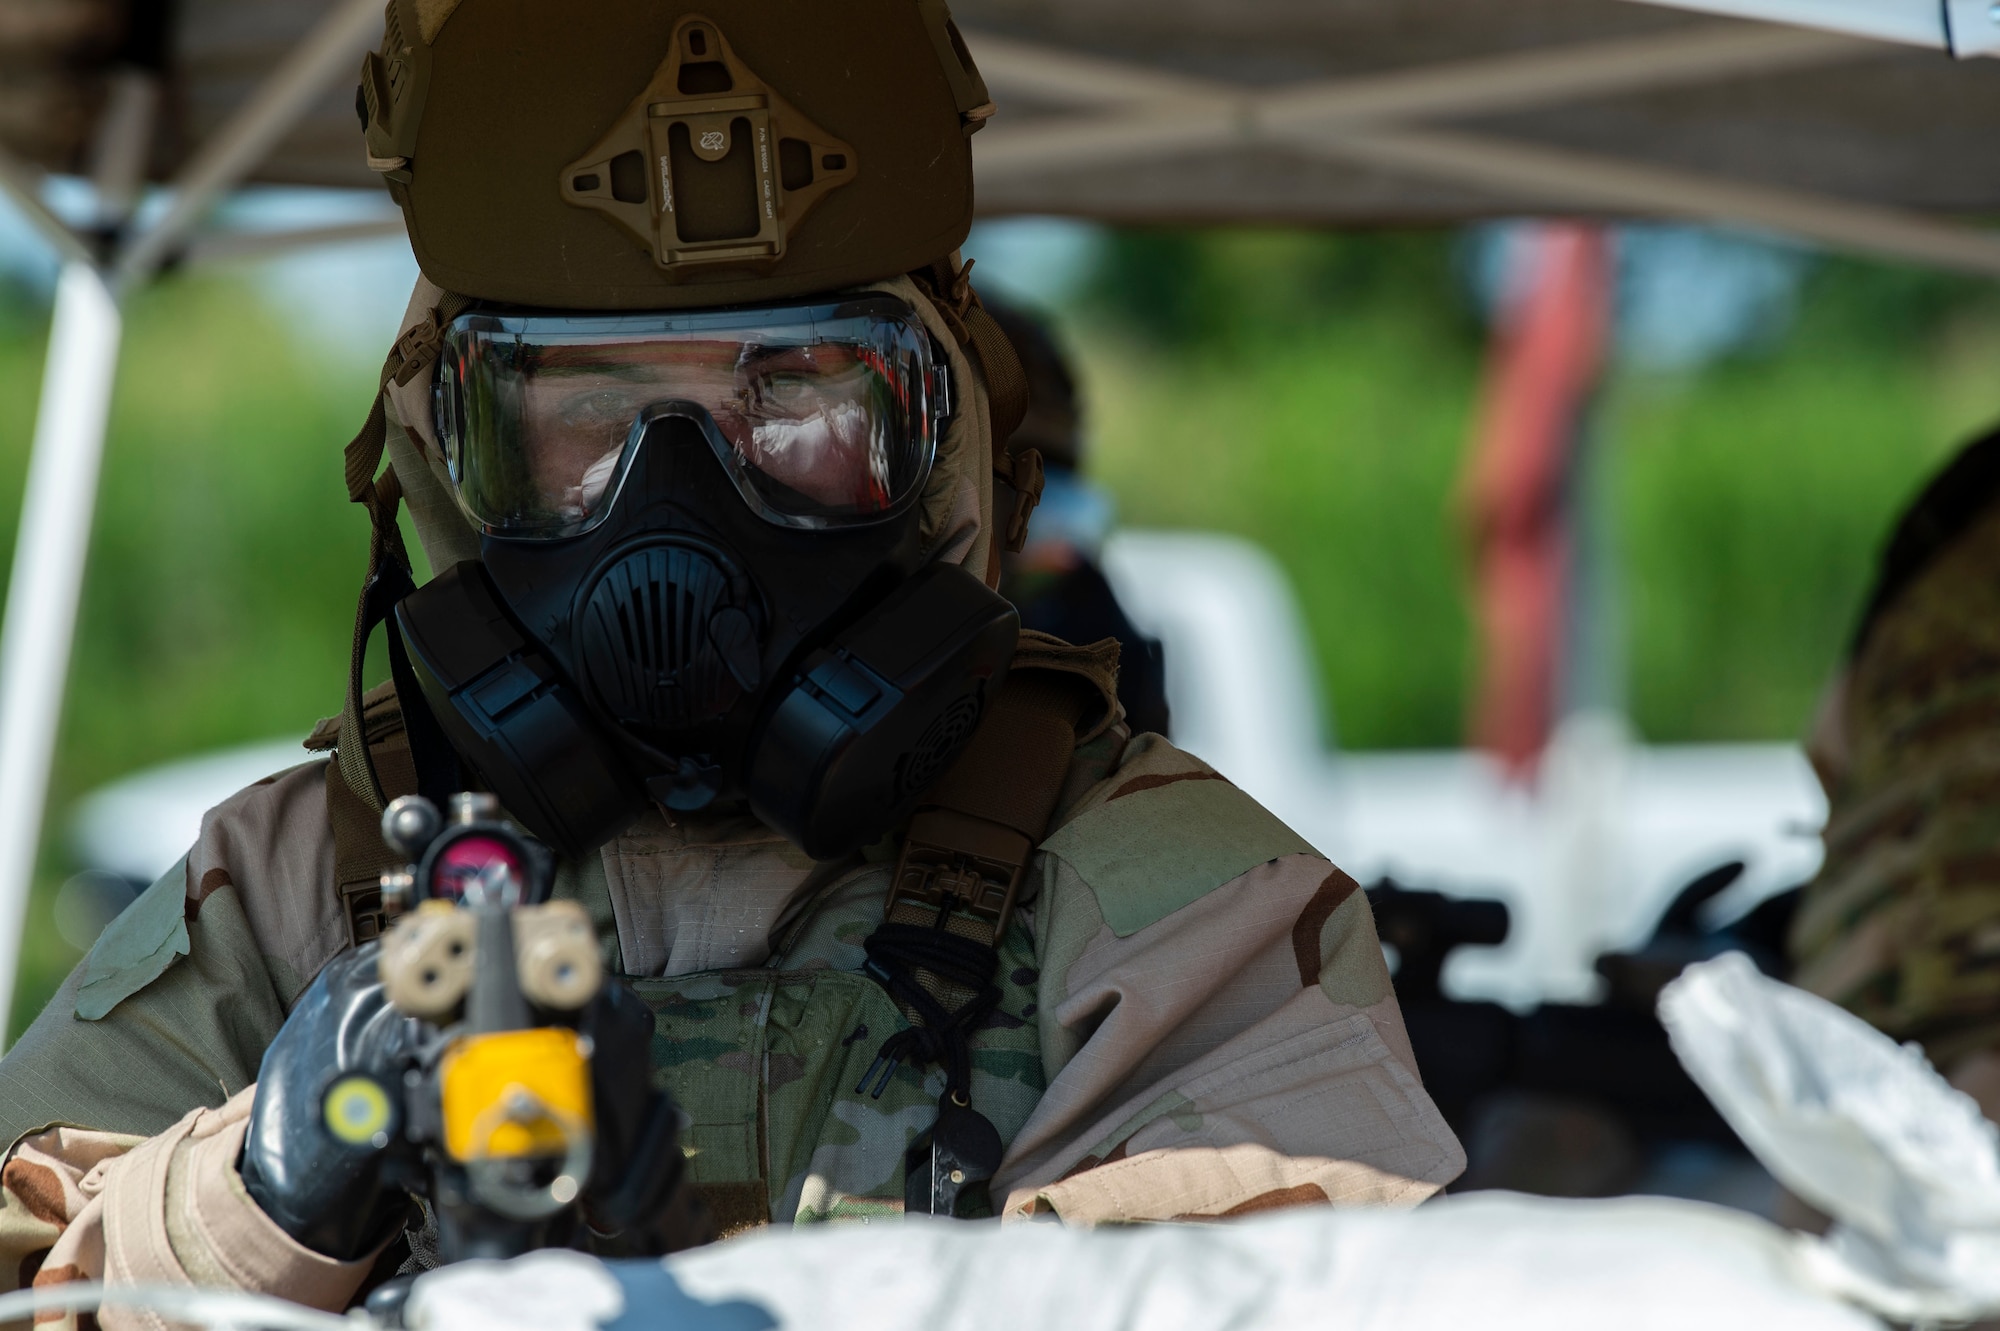 A Team Dover member wearing training protective gear stands guard against possible intruders at a simulated forward operating base during Liberty Eagle Readiness Exercise 2022 at Dover Air Force Base, Delaware, July 13, 2022. The 436th and 512th Airlift Wings tested their ability to generate, employ and sustain airpower across the world in a contested and degraded operational environment. (U.S. Air Force photo by Roland Balik)